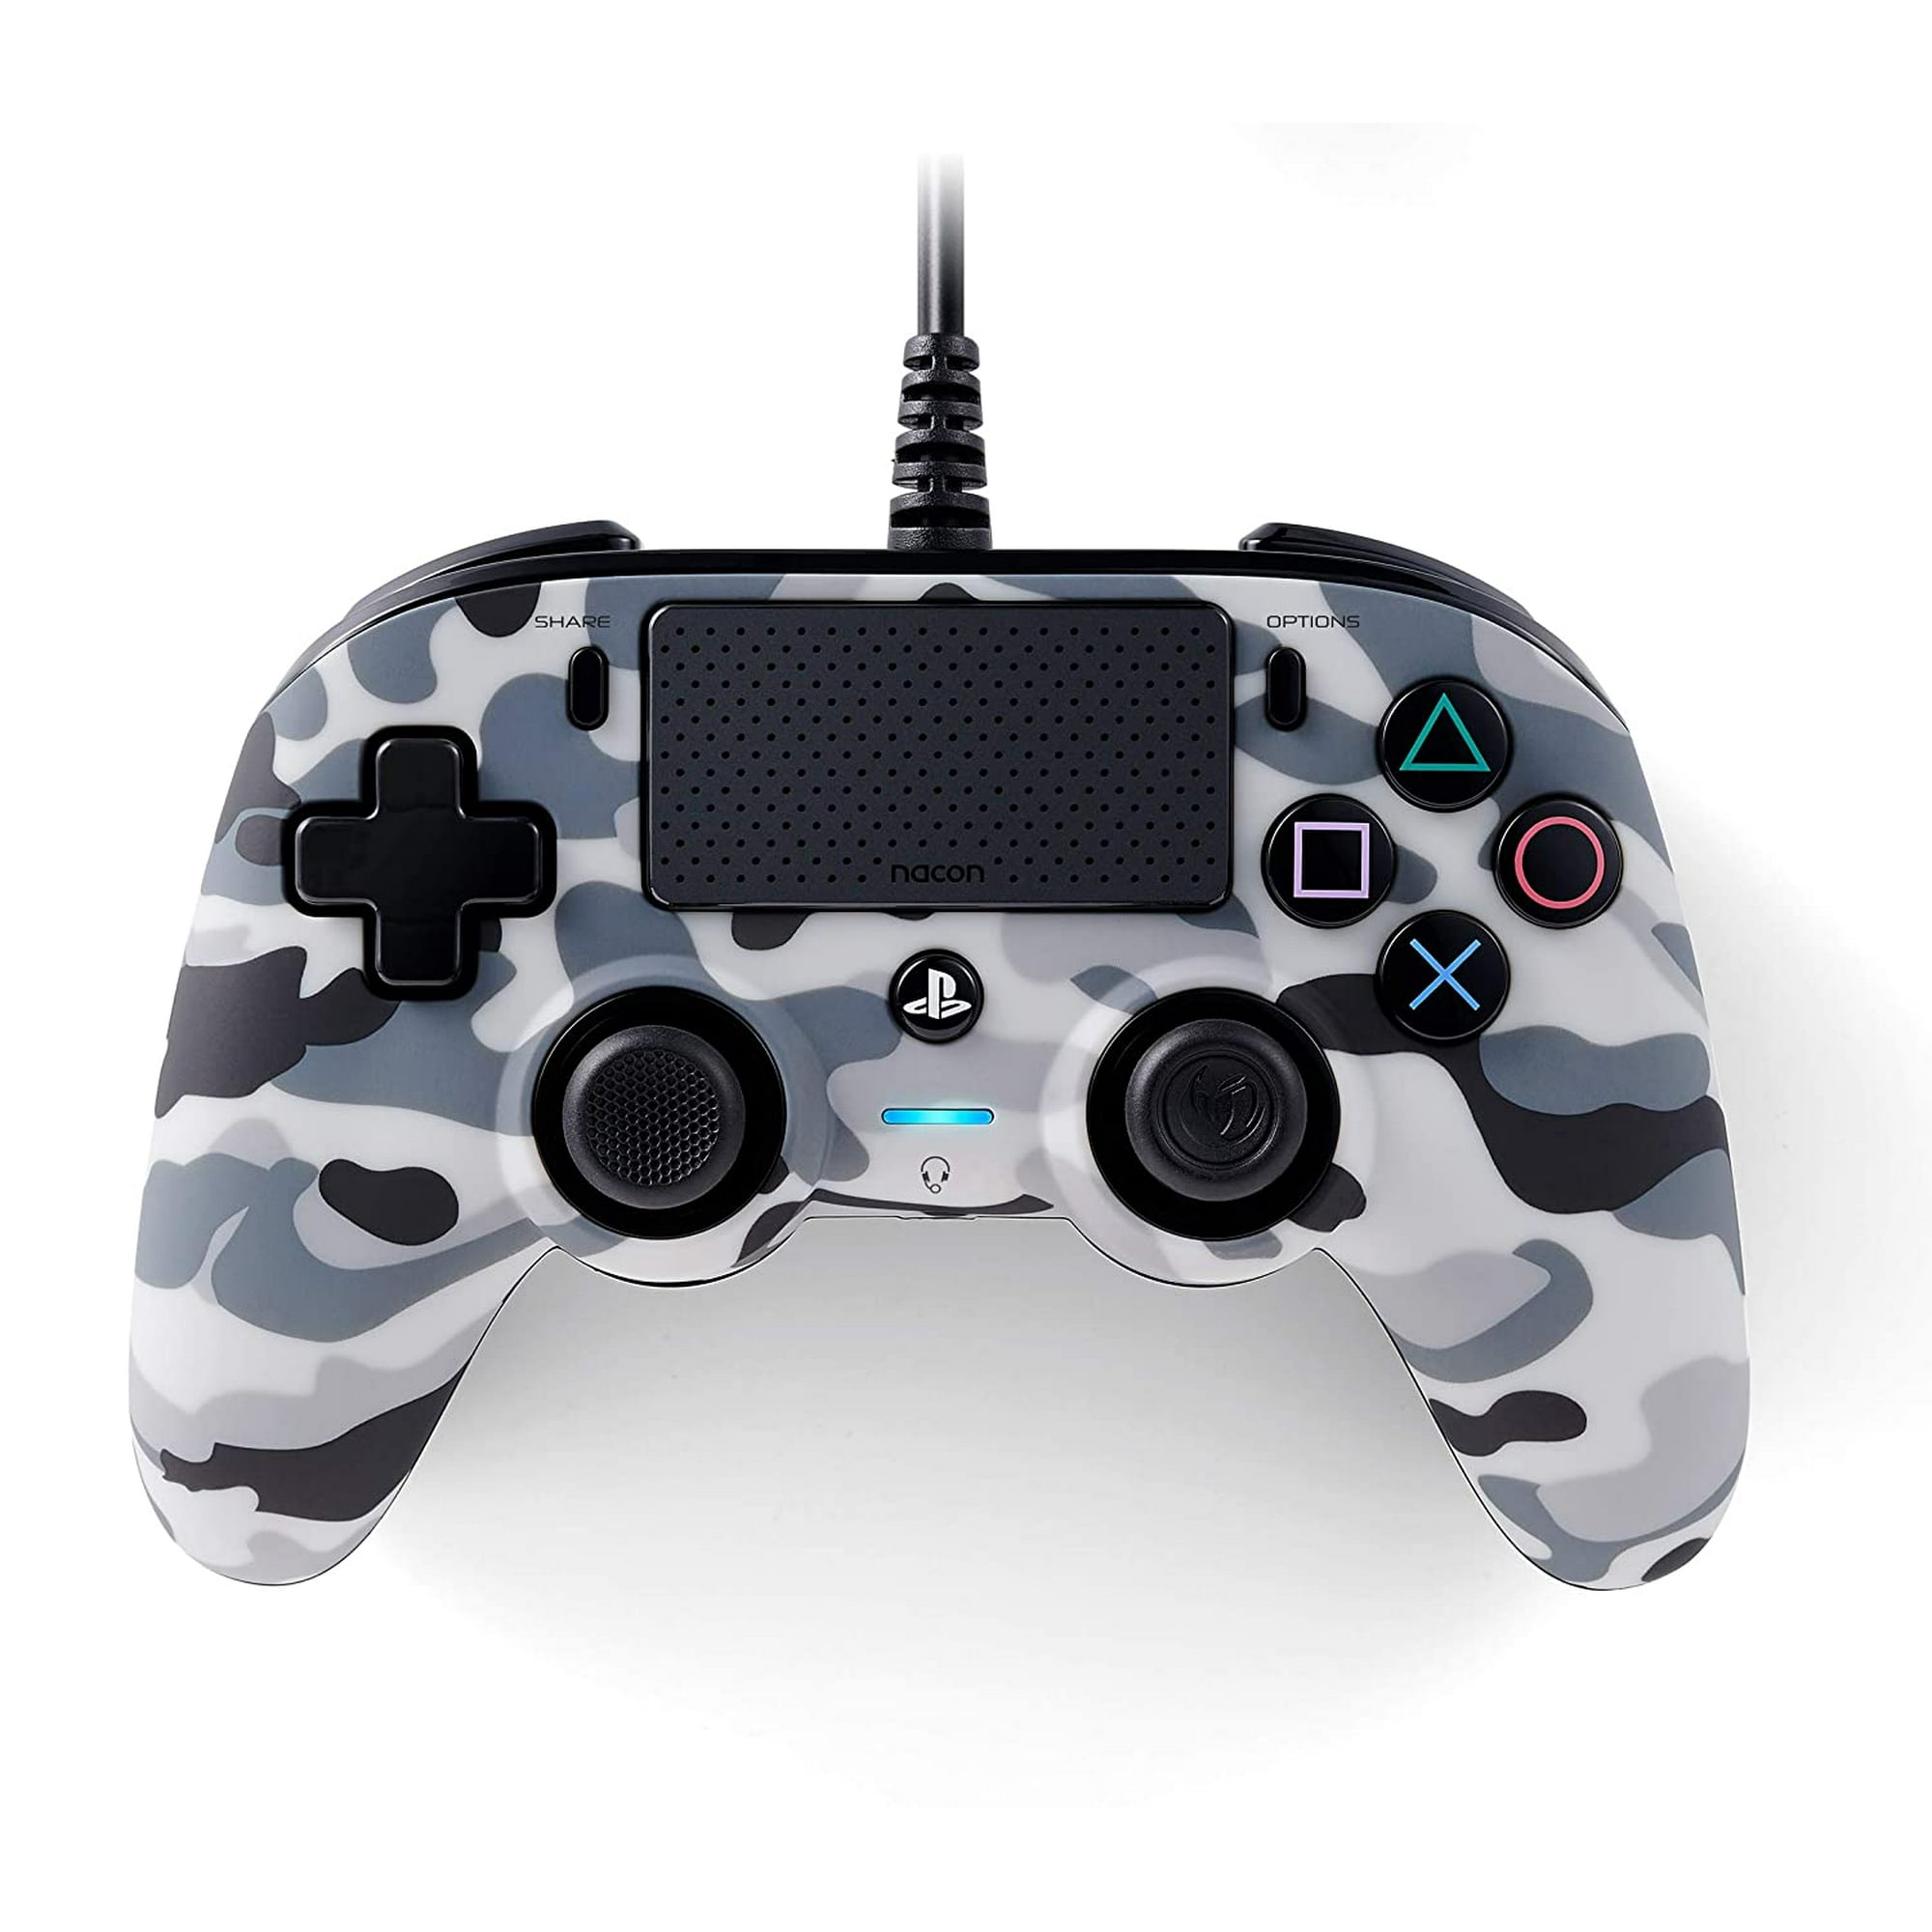 Gætte Andragende mestre Nacon Compact PS4 Wired Controller - Camo Grey | Walmart Canada